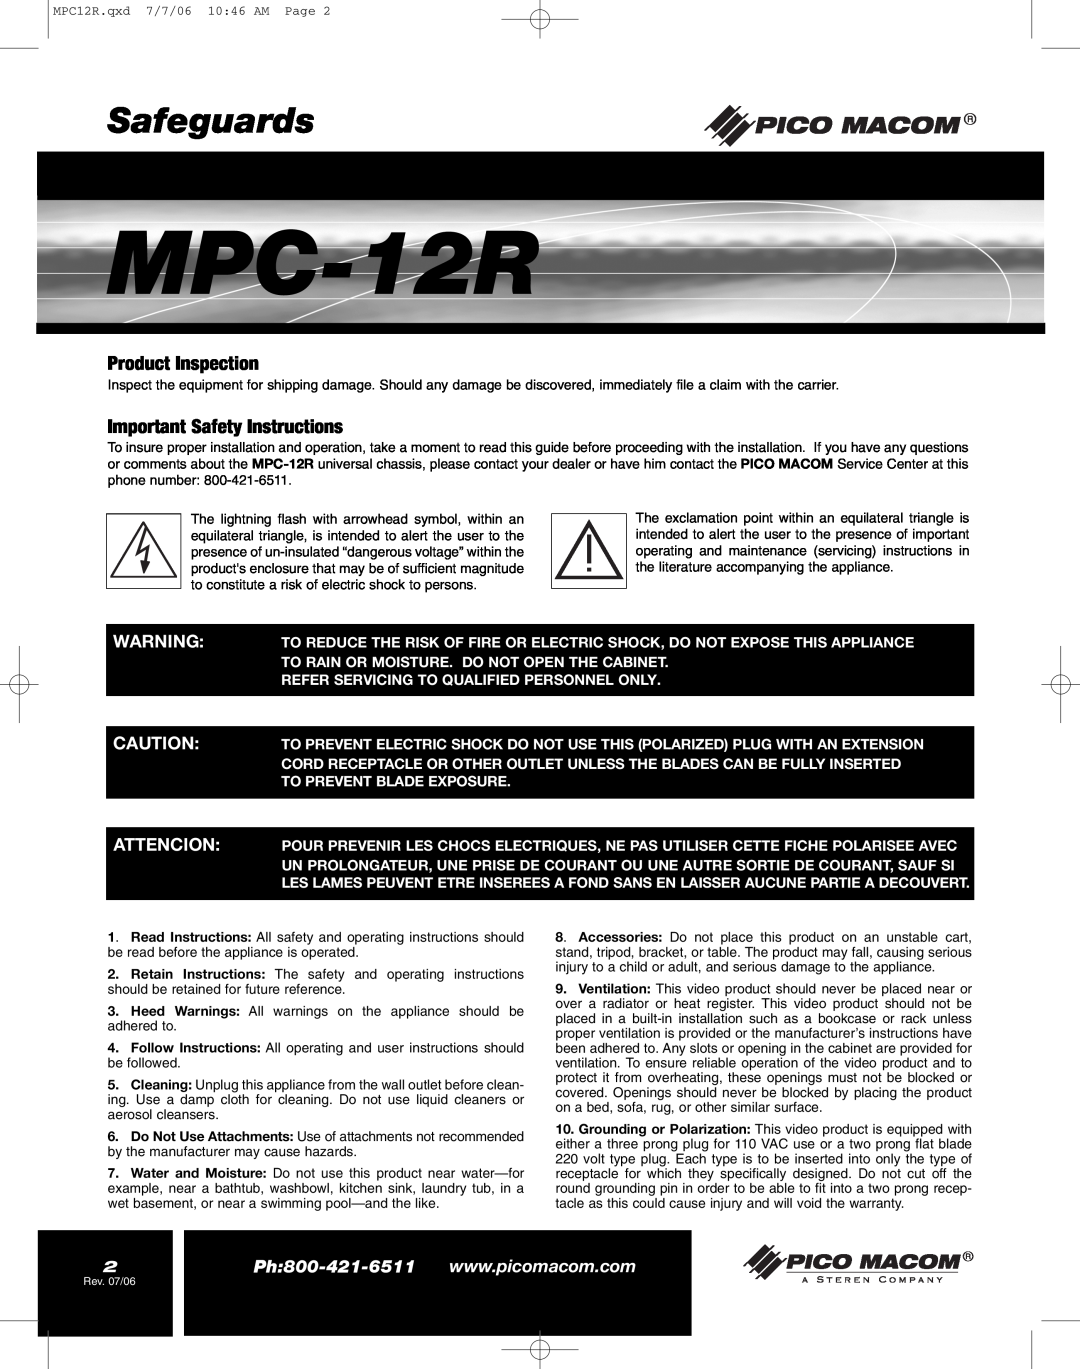 Pico Macom MPC-12R manual Safeguards, Product Inspection, Important Safety Instructions 